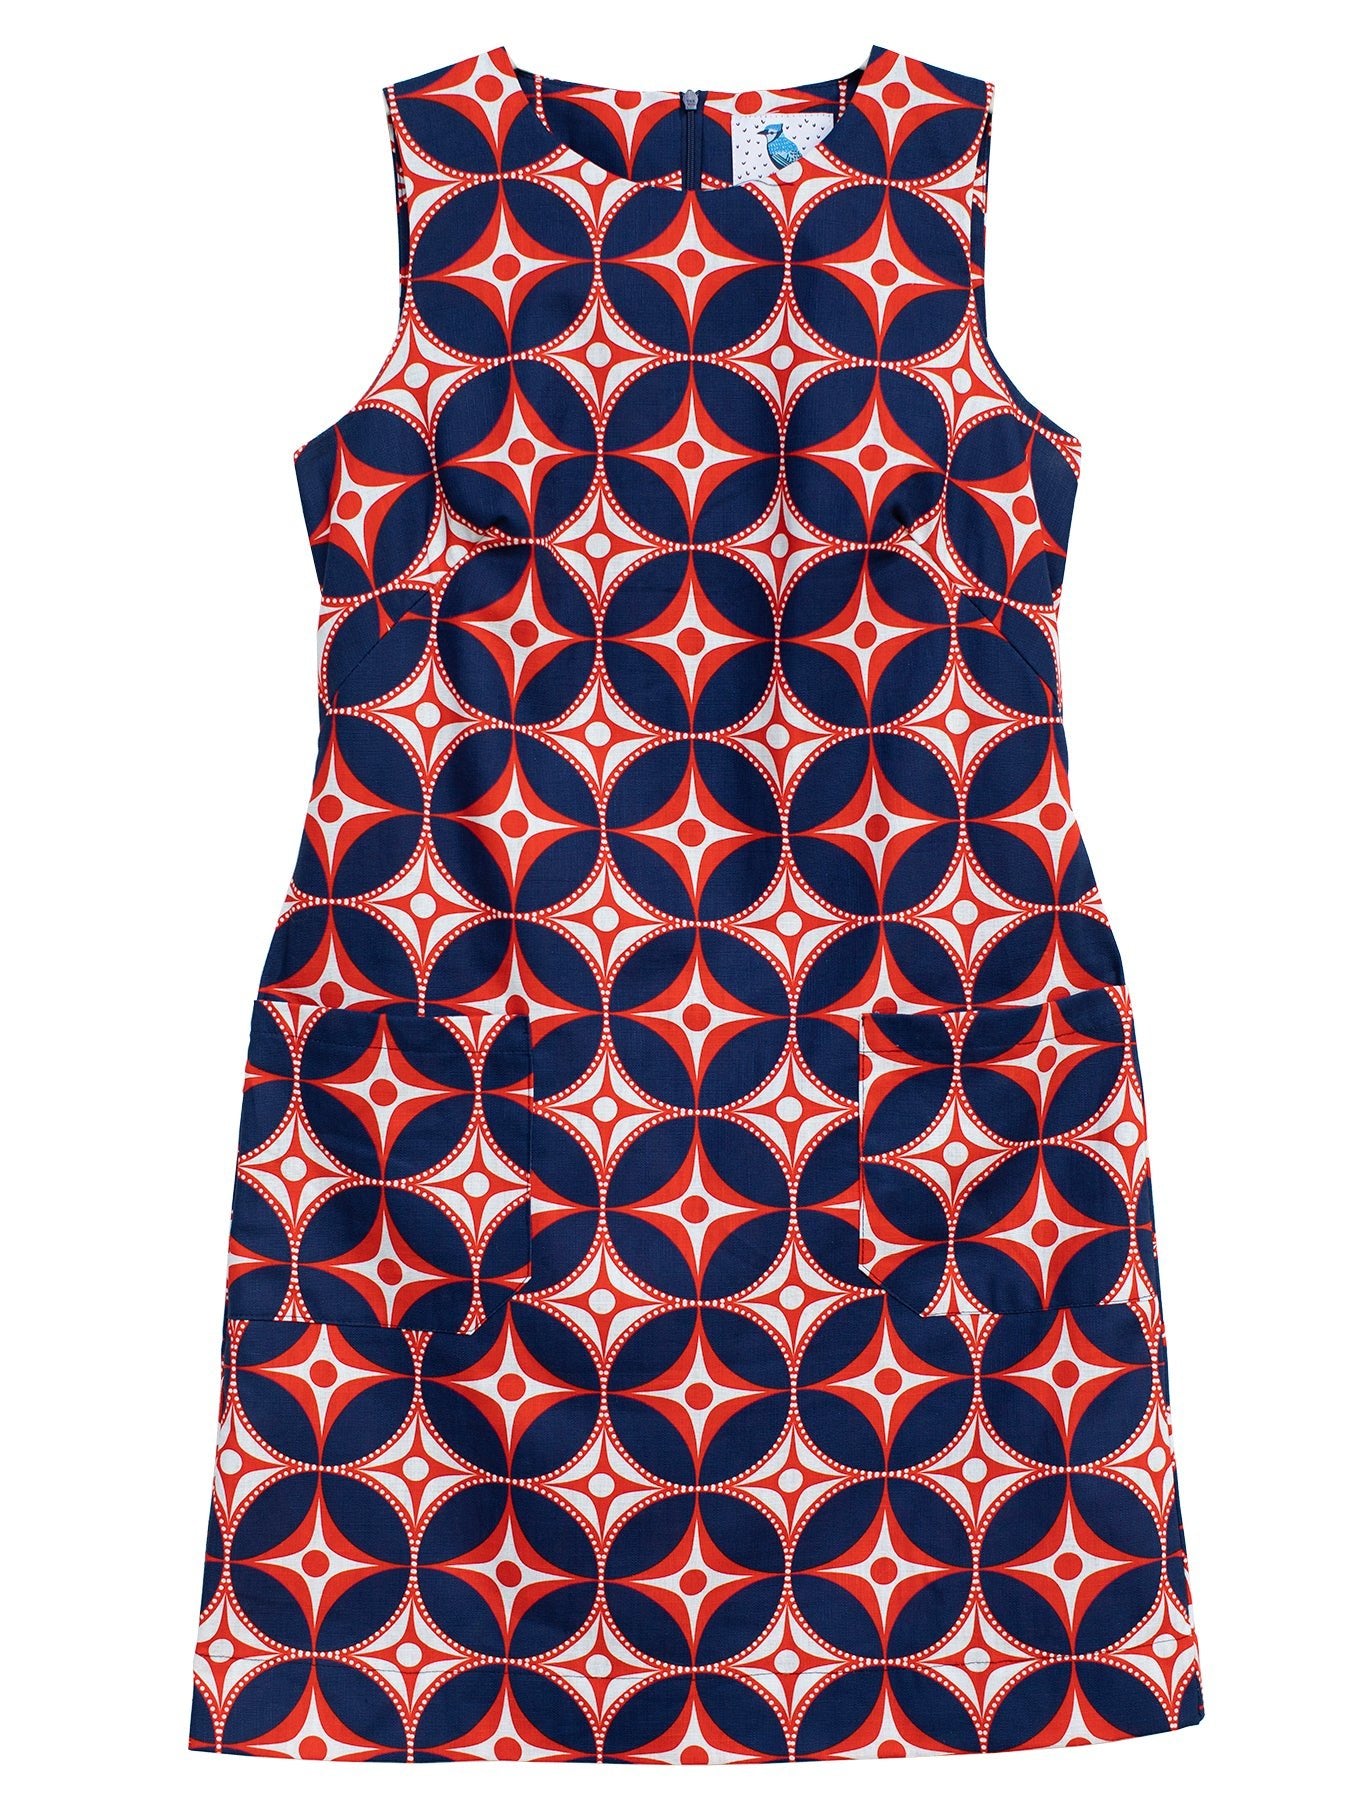 MOLLY dress North Star Navy/Red - Lesley Evers-cotton dress-Dress-MOLLY